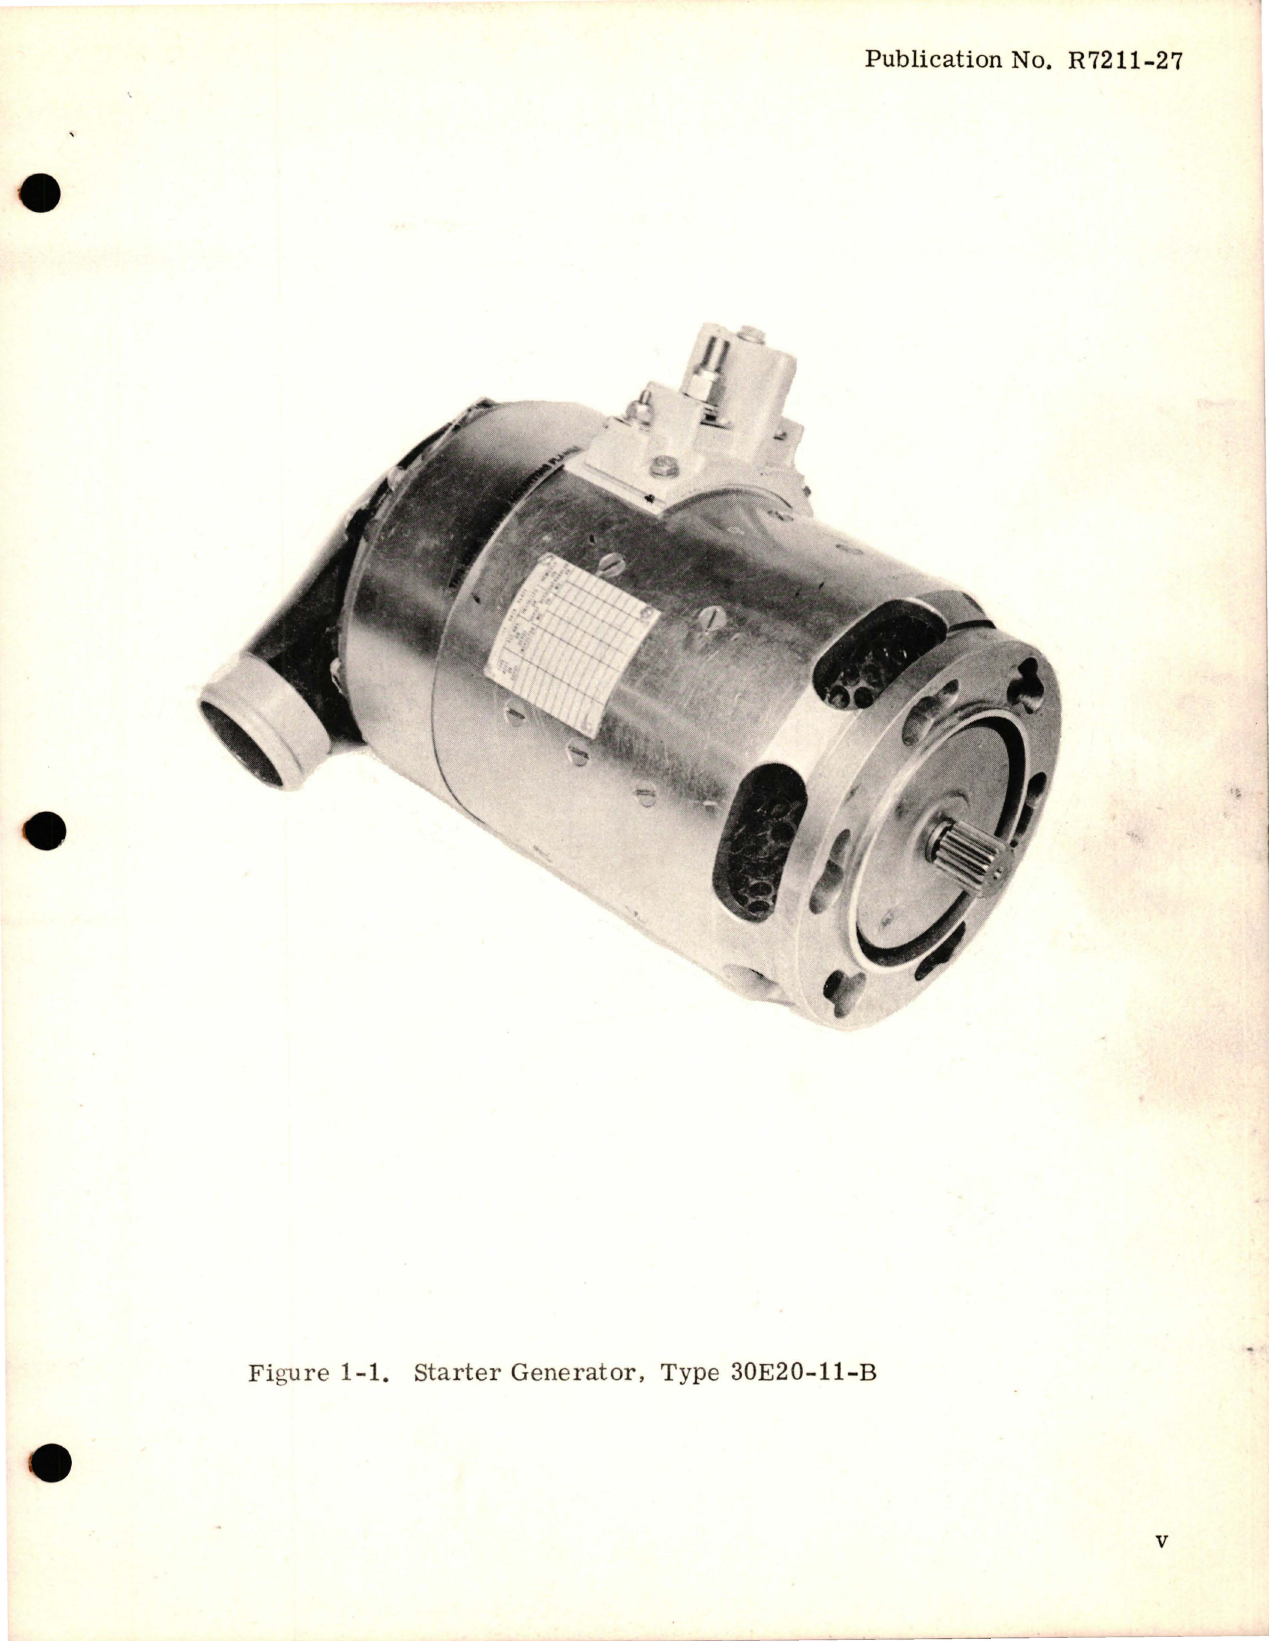 Sample page 7 from AirCorps Library document: Maintenance Instructions for Starter Generator - Type 30E20-11-B 